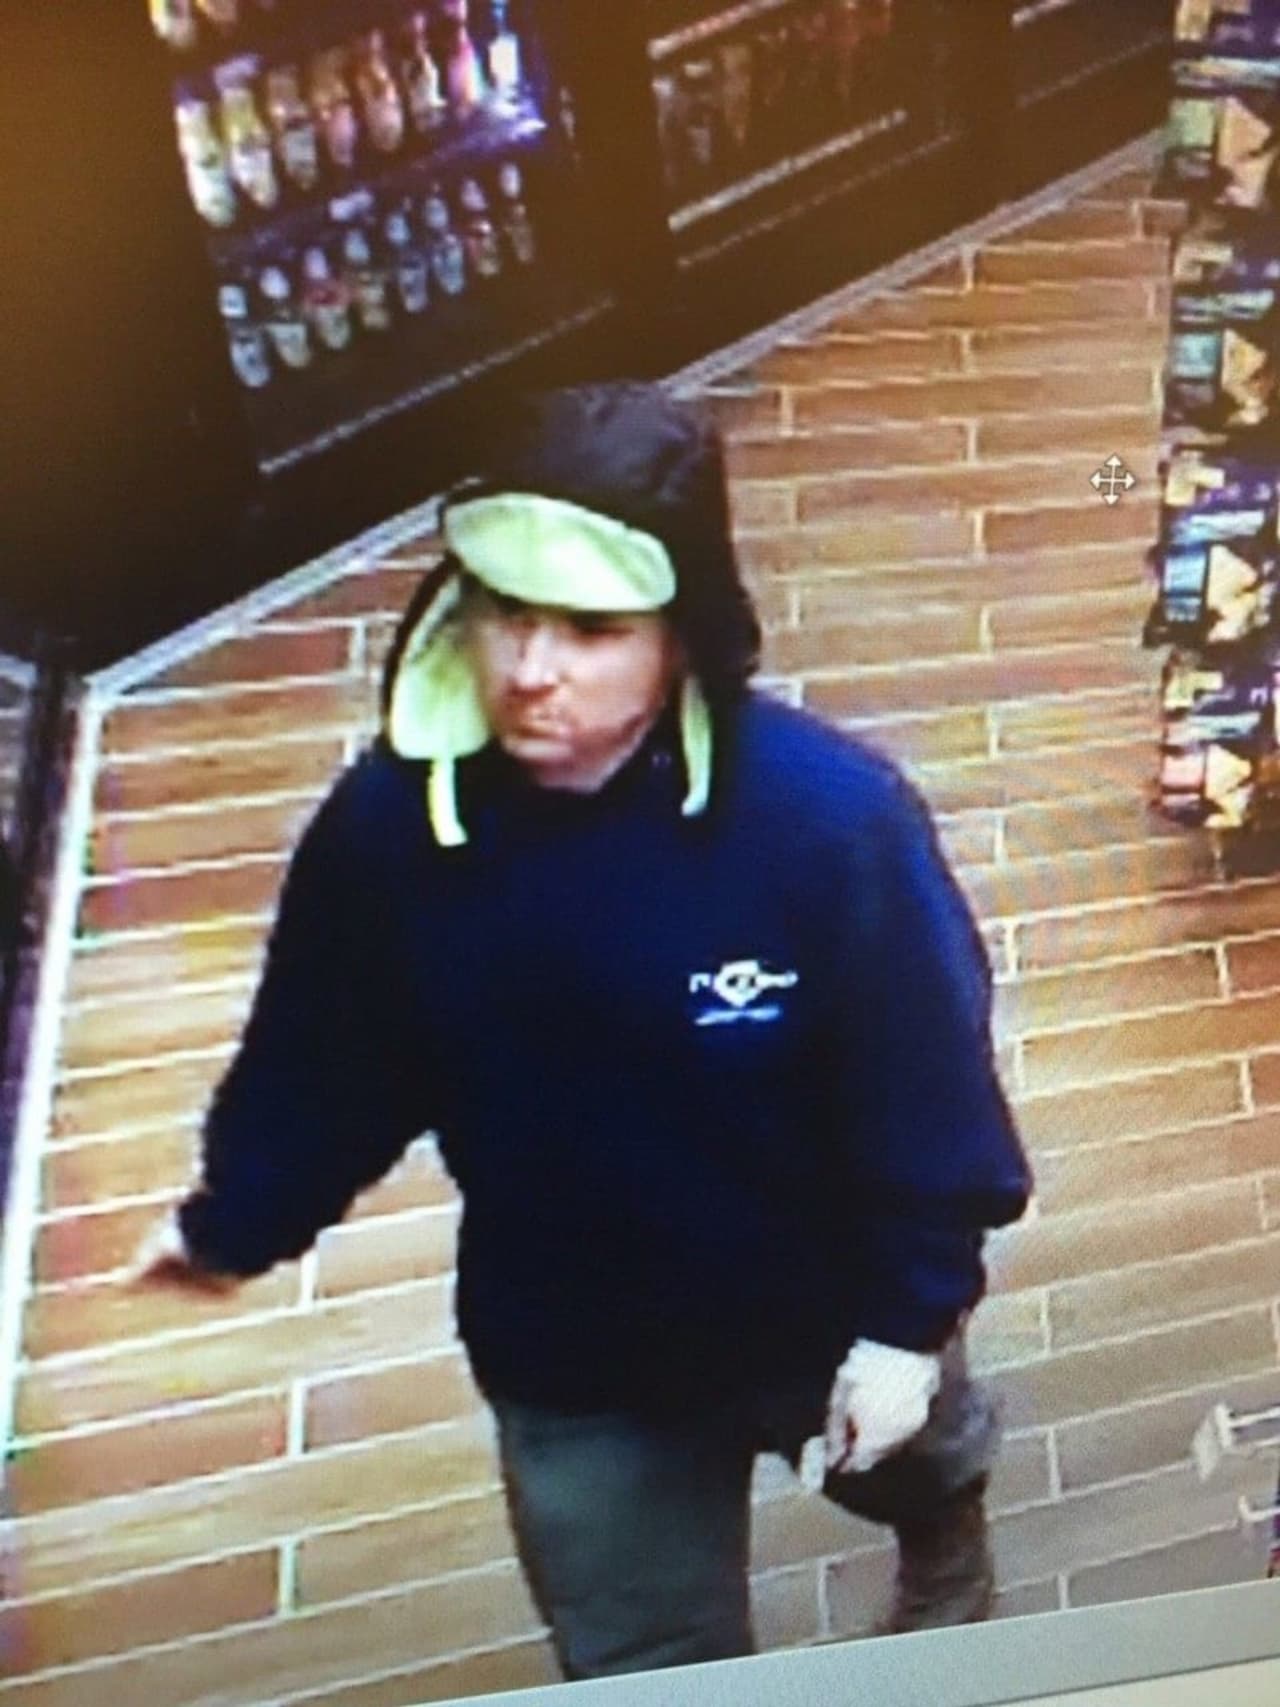 Police are looking for this man in connection with a strong-arm robbery Wednesday night at a store in Bethel.